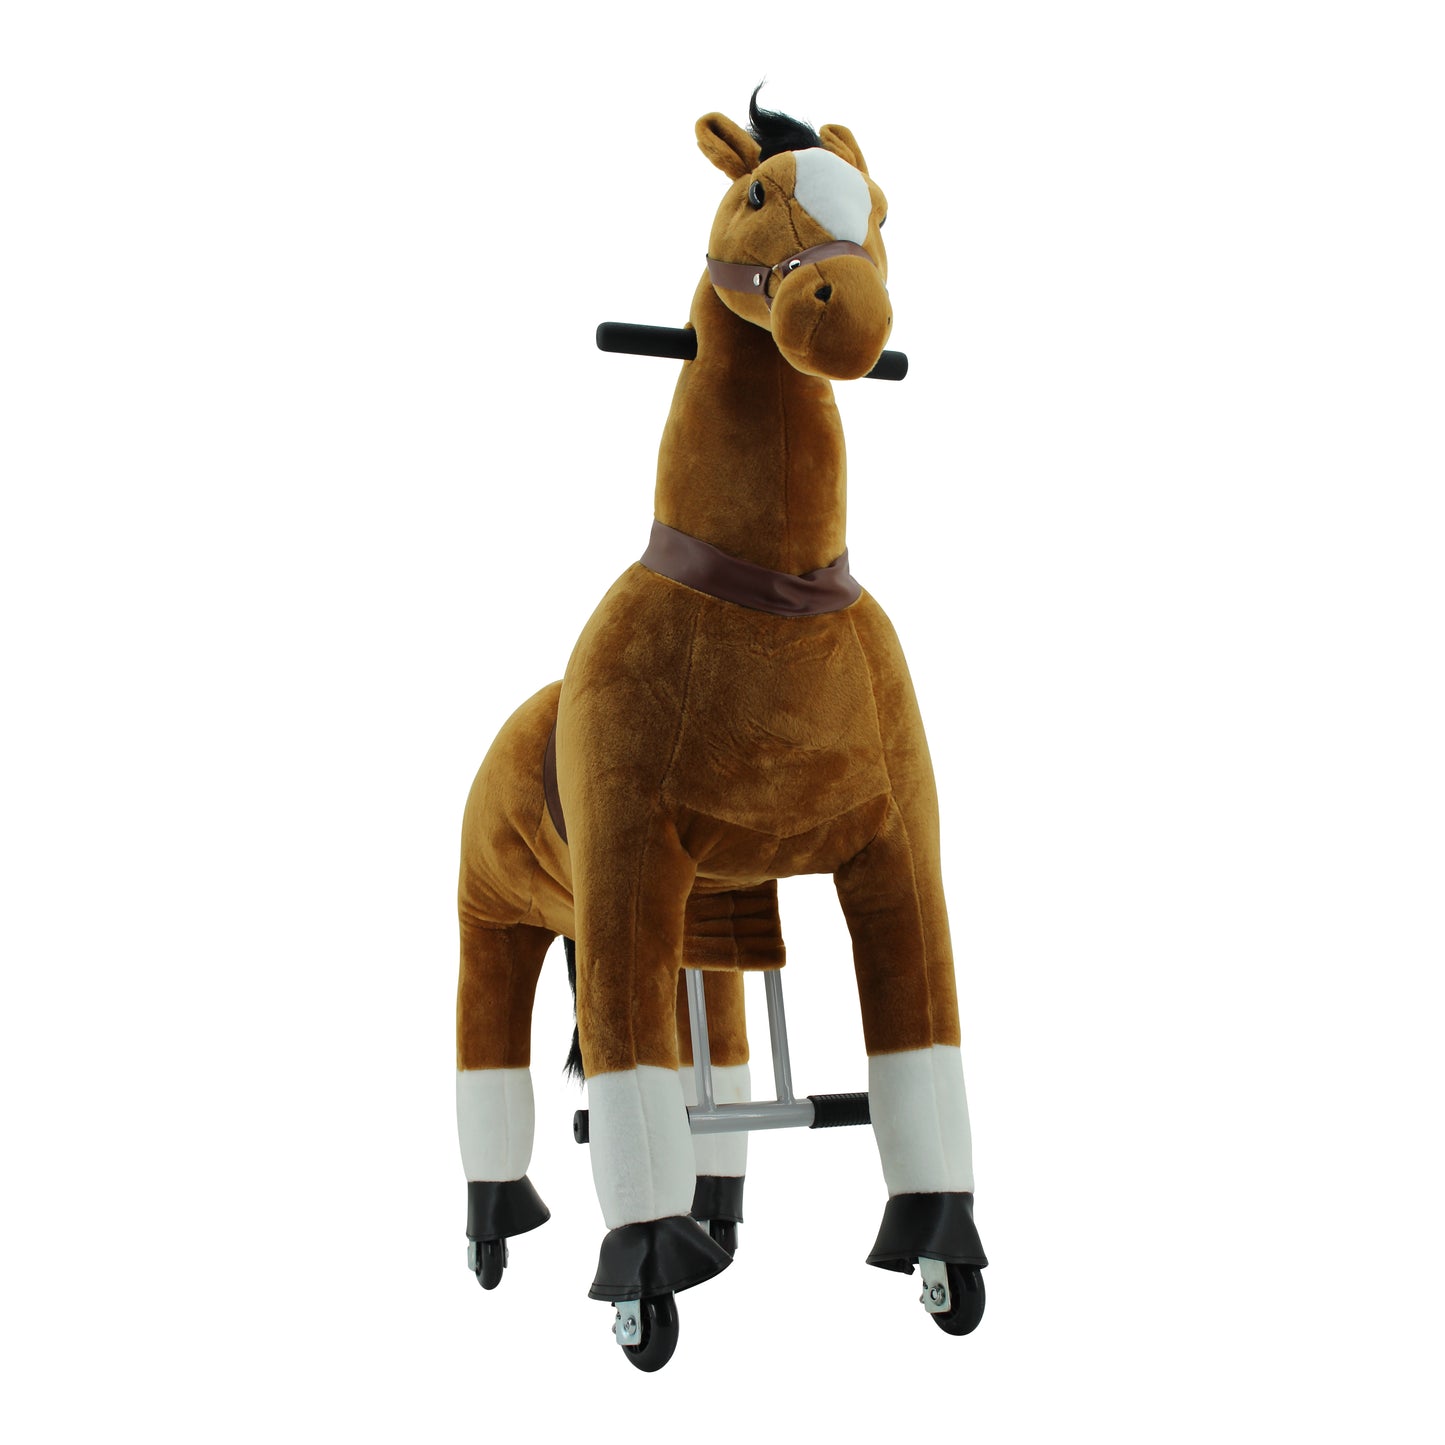 Sweety Toys 7363 BROWNIE horse riding animal on wheels for 4 to 9 years -RIDING ANIMAL